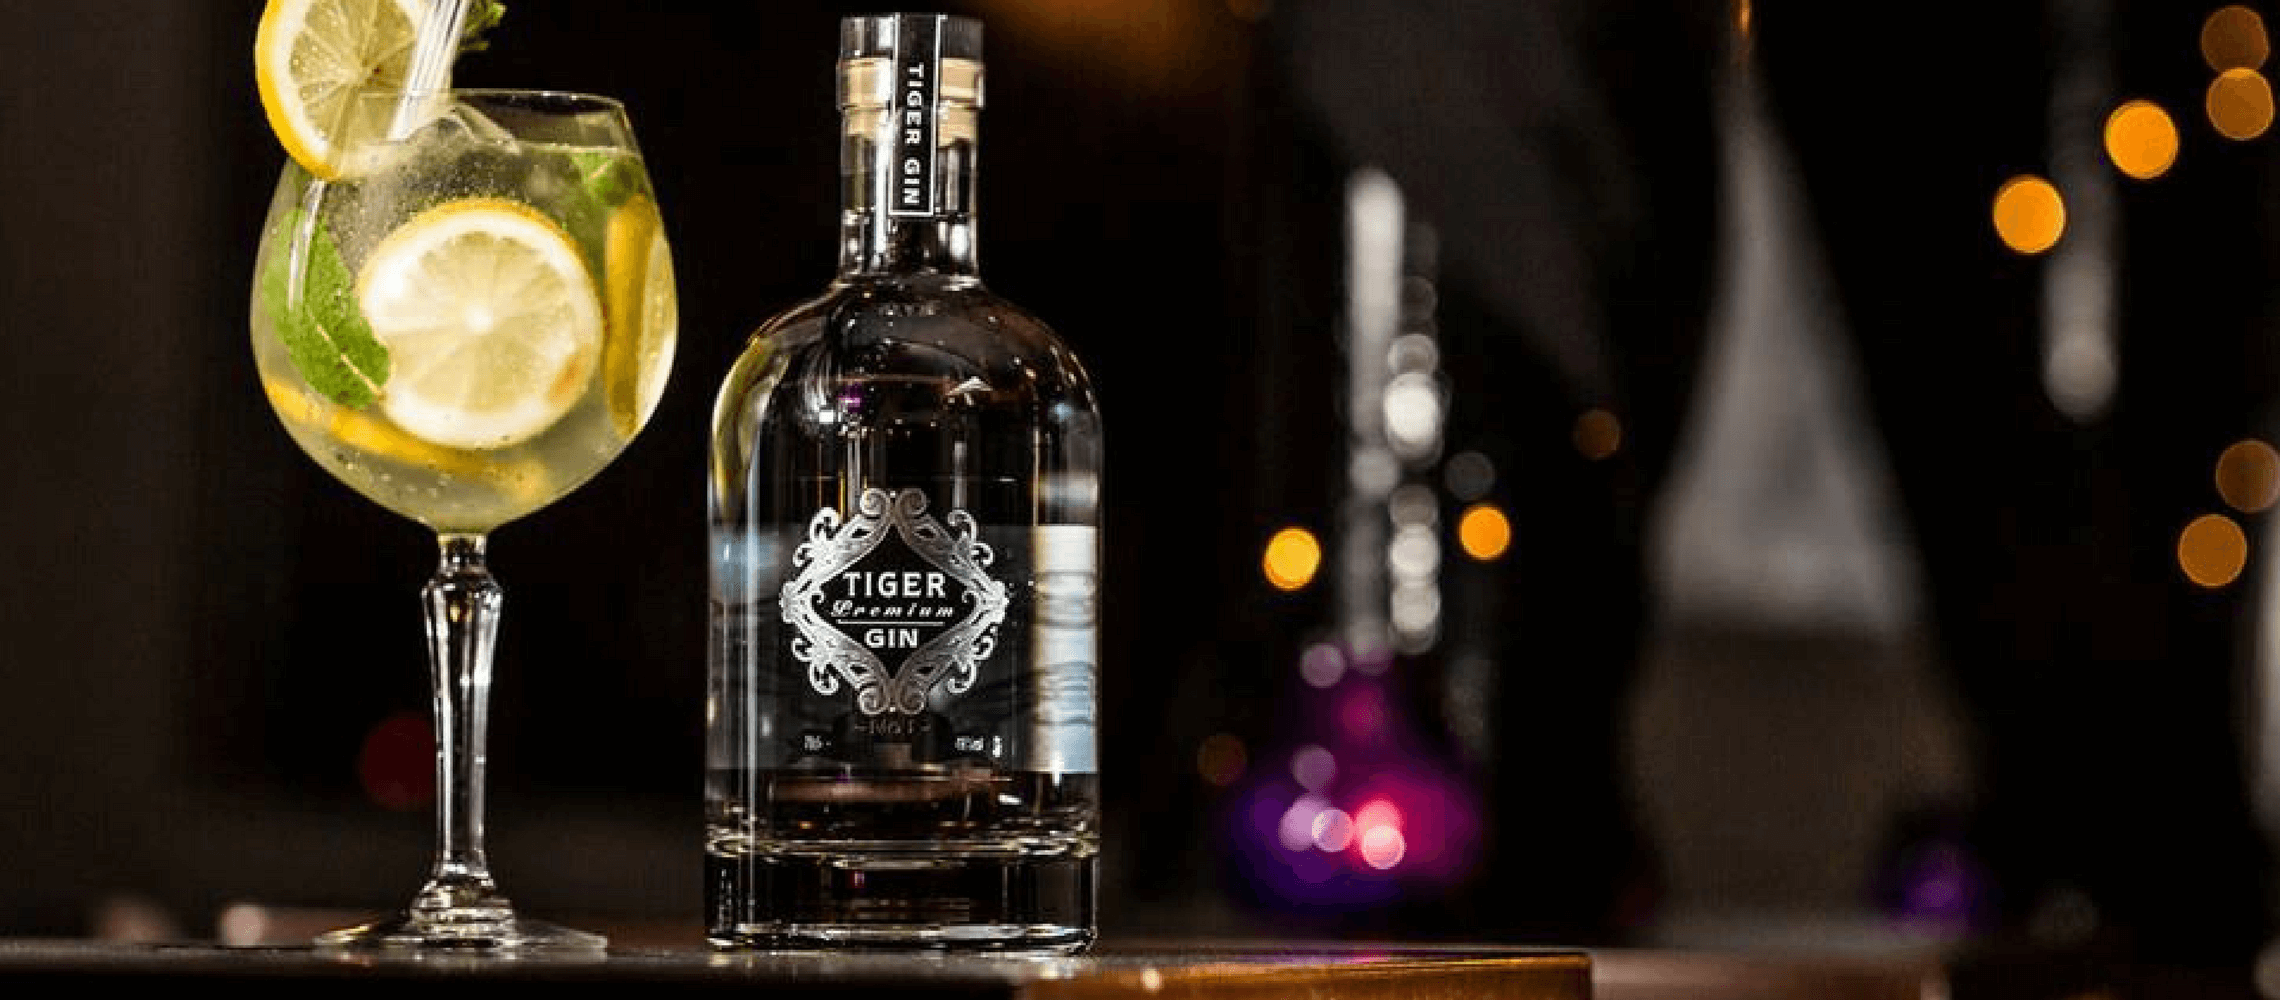 Photo for: The British Tiger Gin to enter London Spirits Competition (LSC)